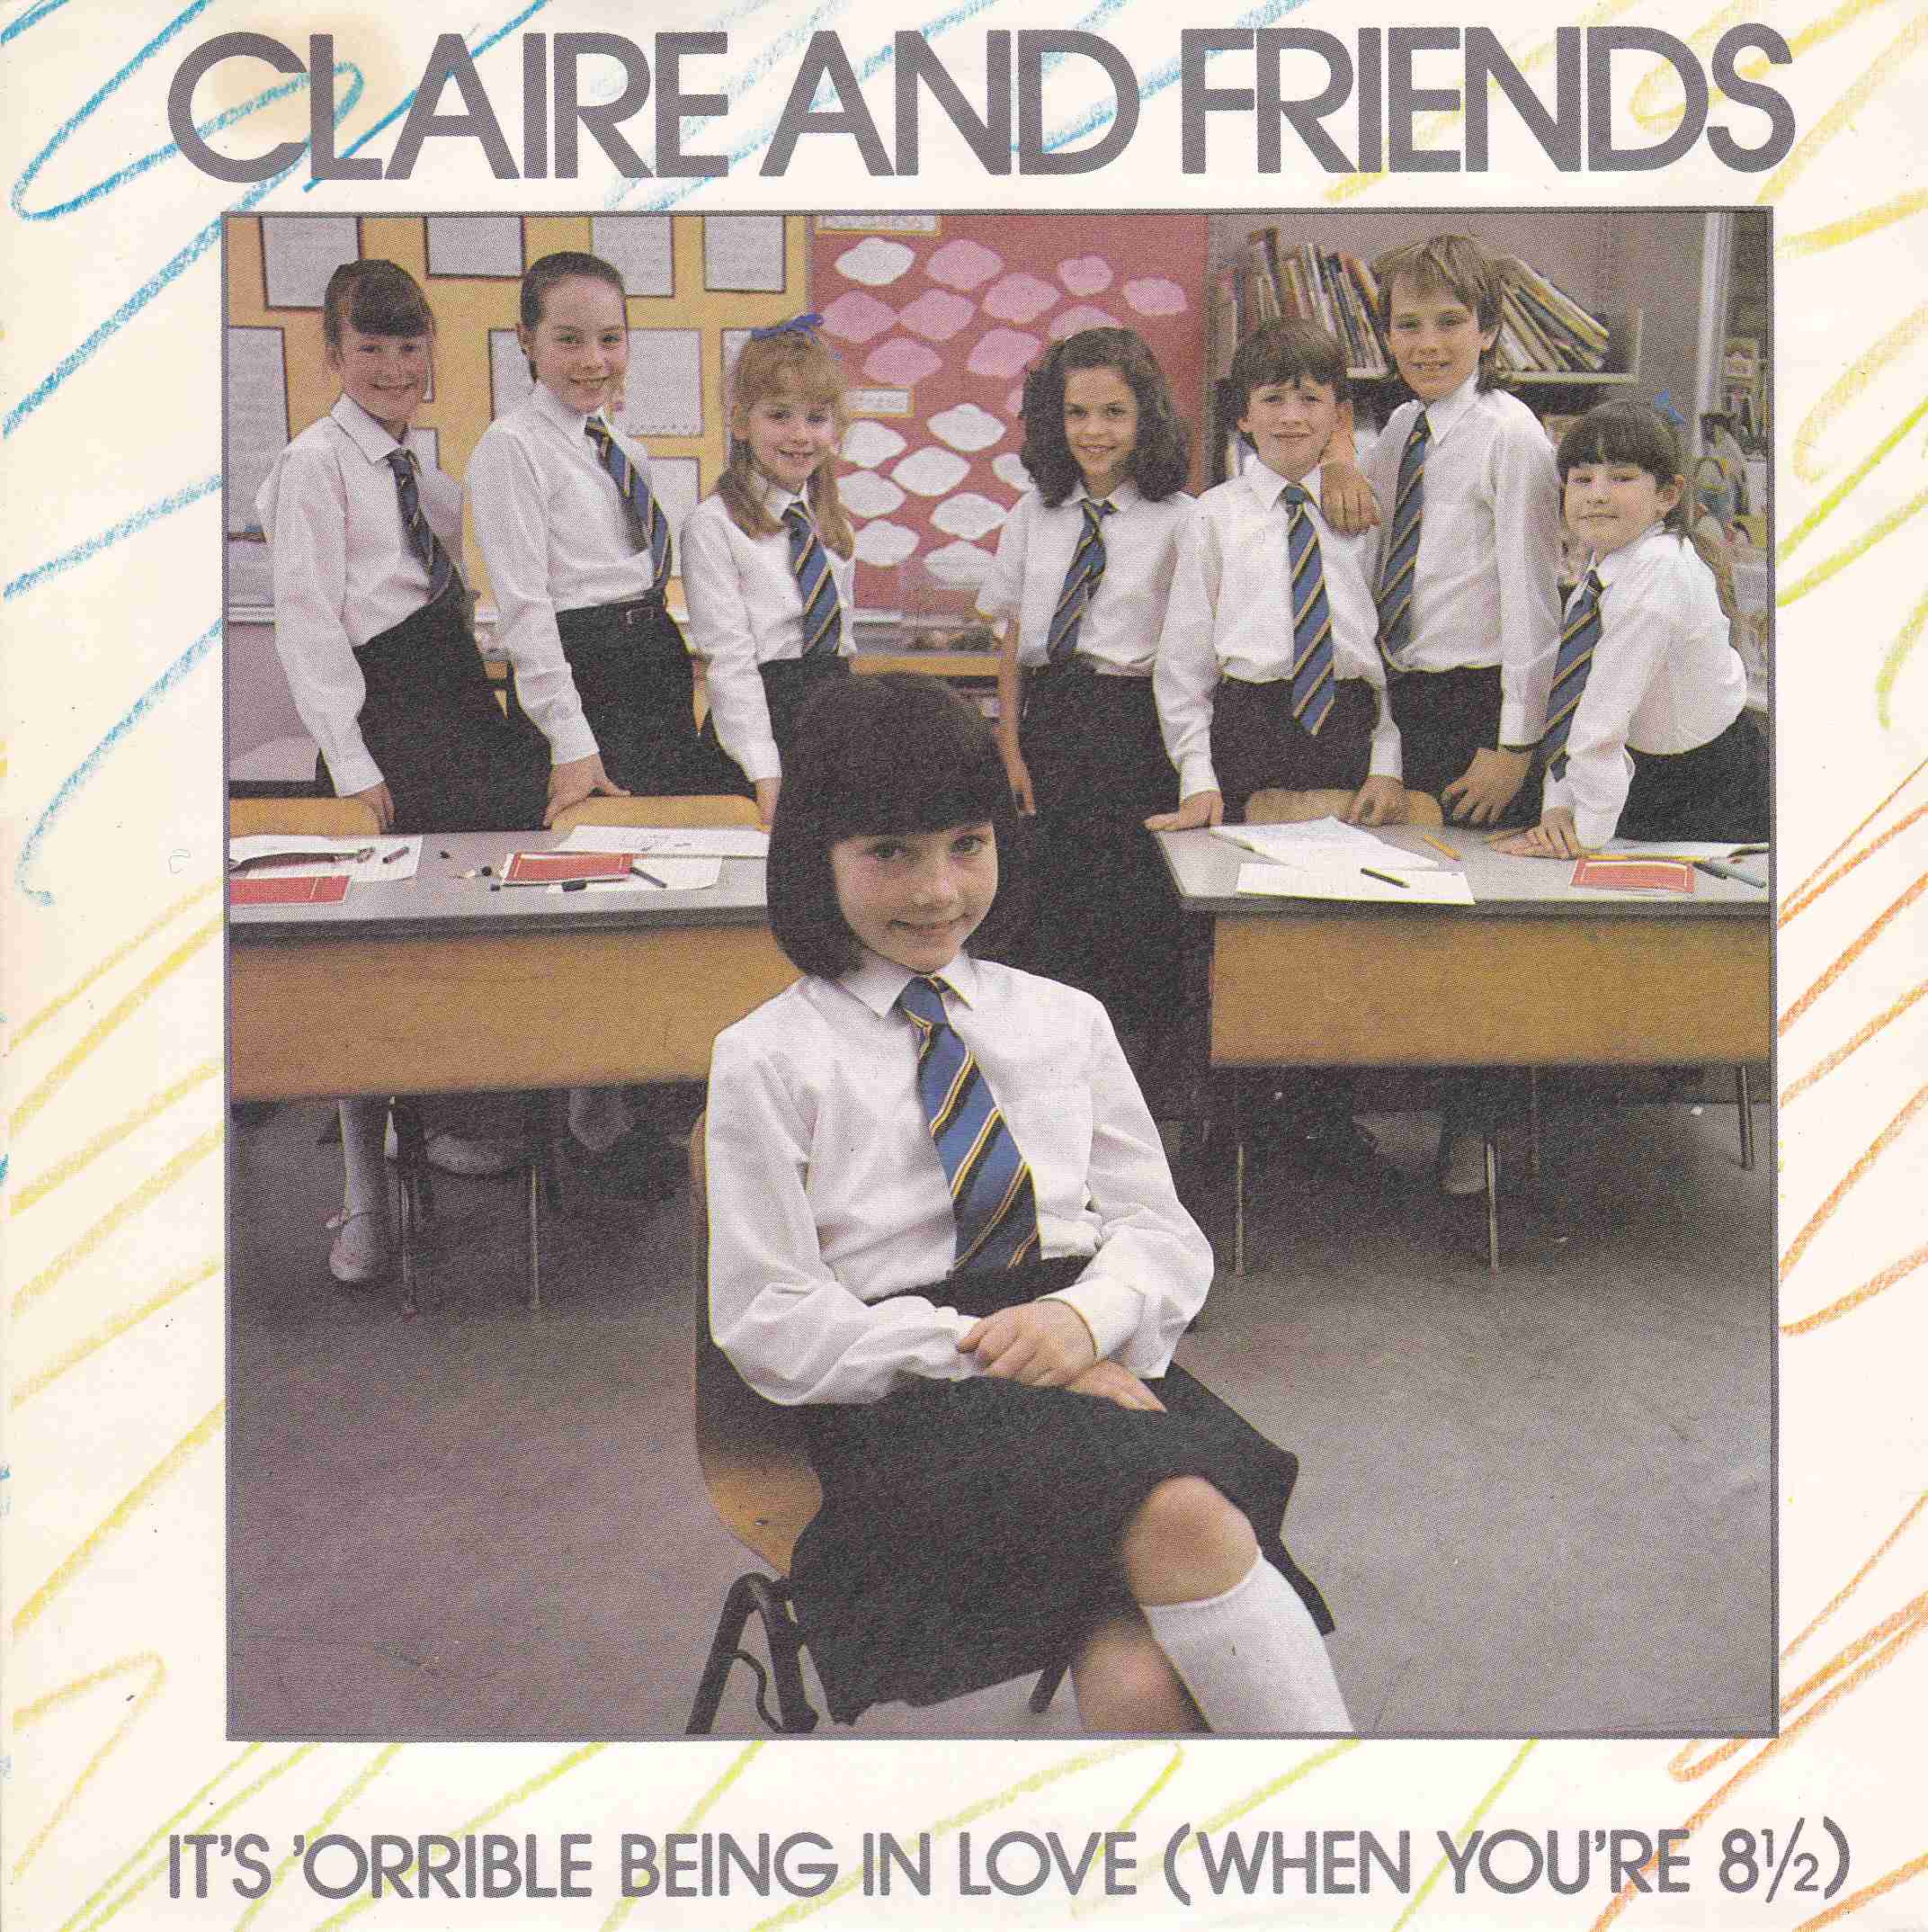 Picture of RESL 189 It's 'orrible being in love (when you're 8 1/2) by artist Claire and Friends (Claire Usher) from the BBC records and Tapes library